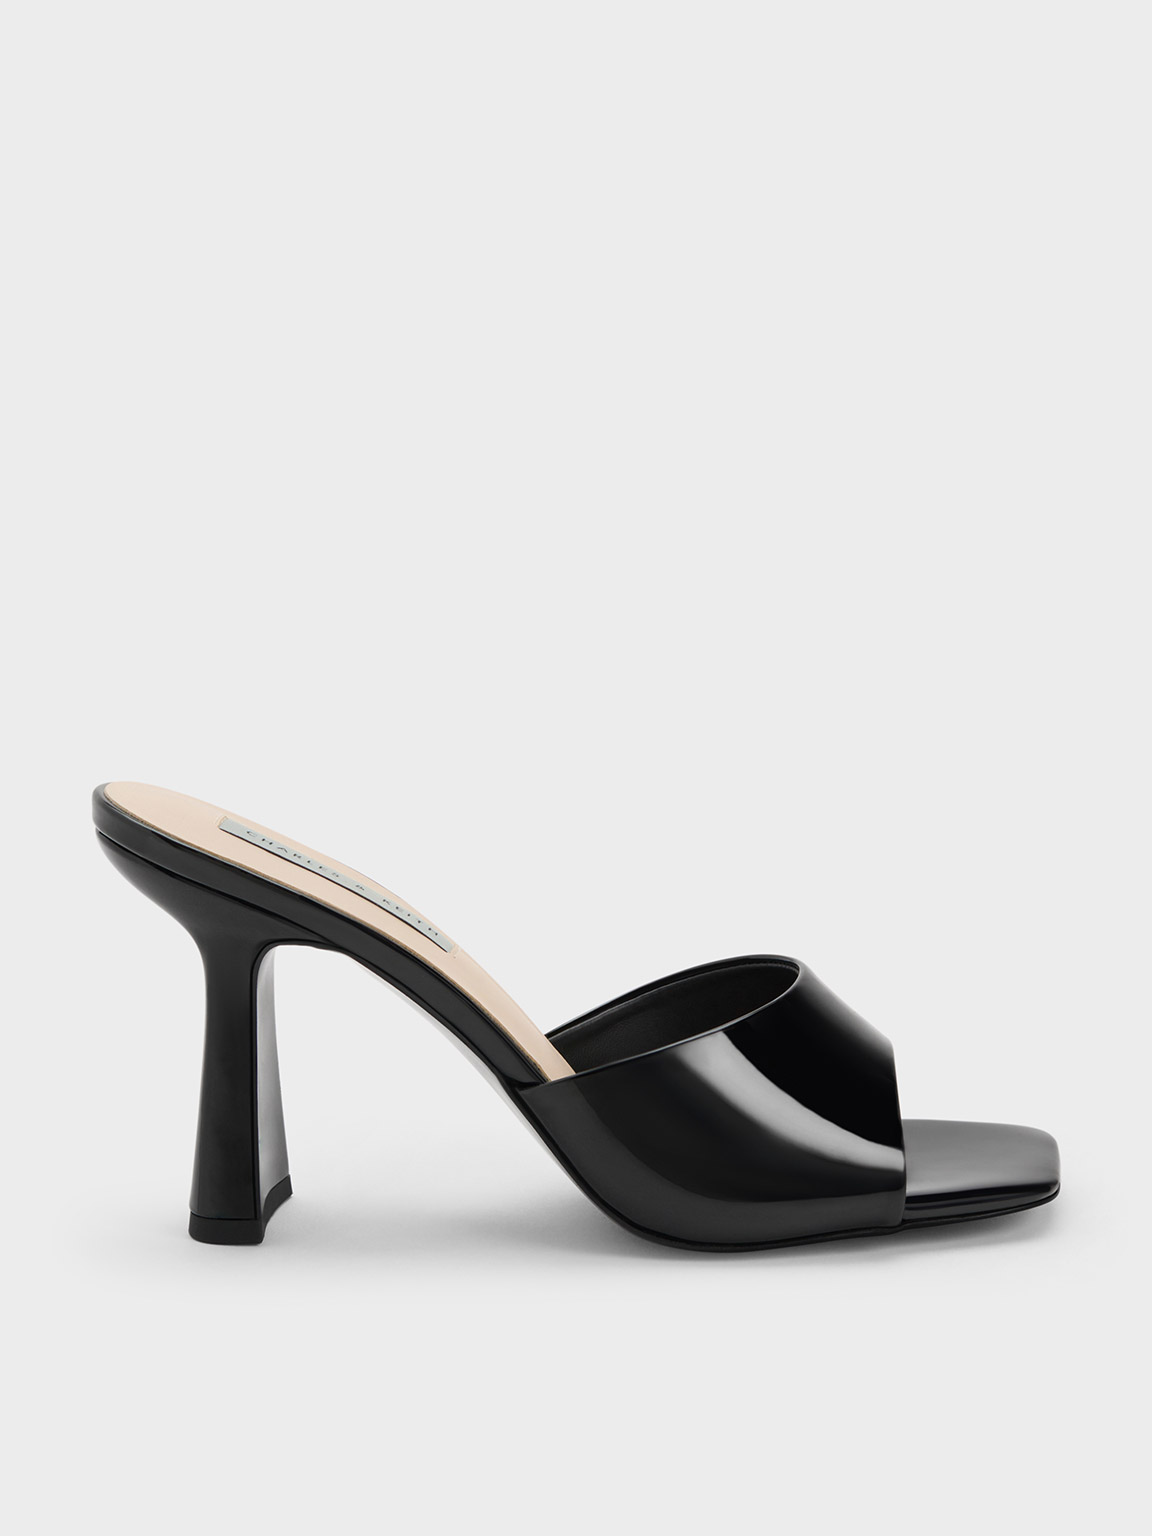 Black Patent Patent Square Toe Heeled Mules - CHARLES & KEITH SG